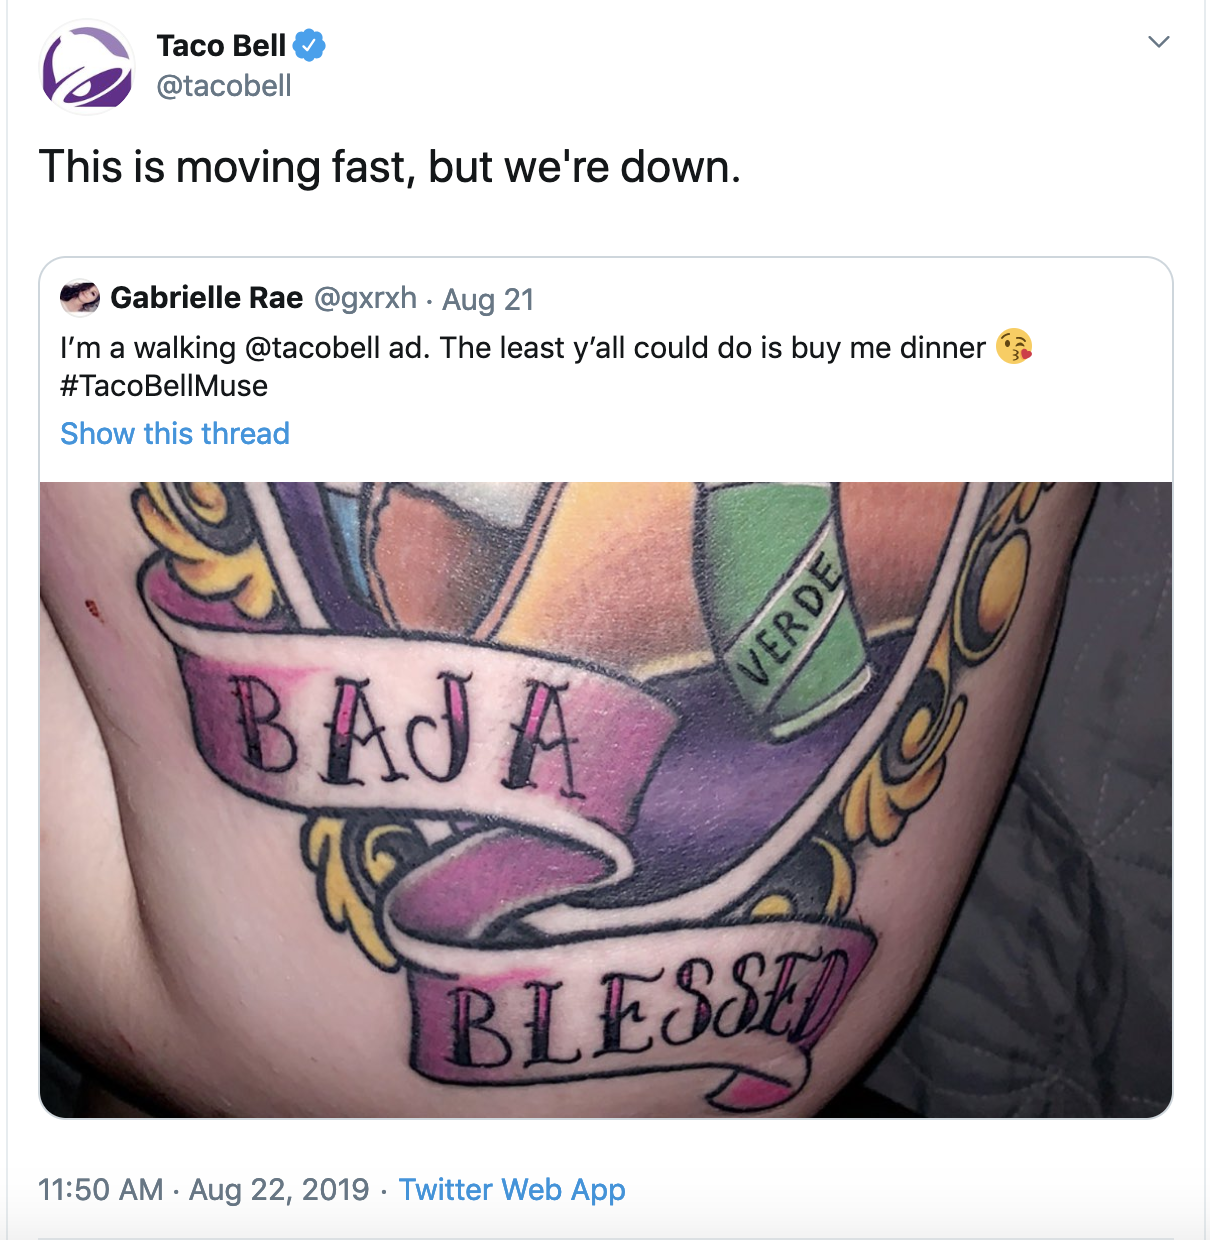 Taco Bell uses humor to delight customers on Twitter